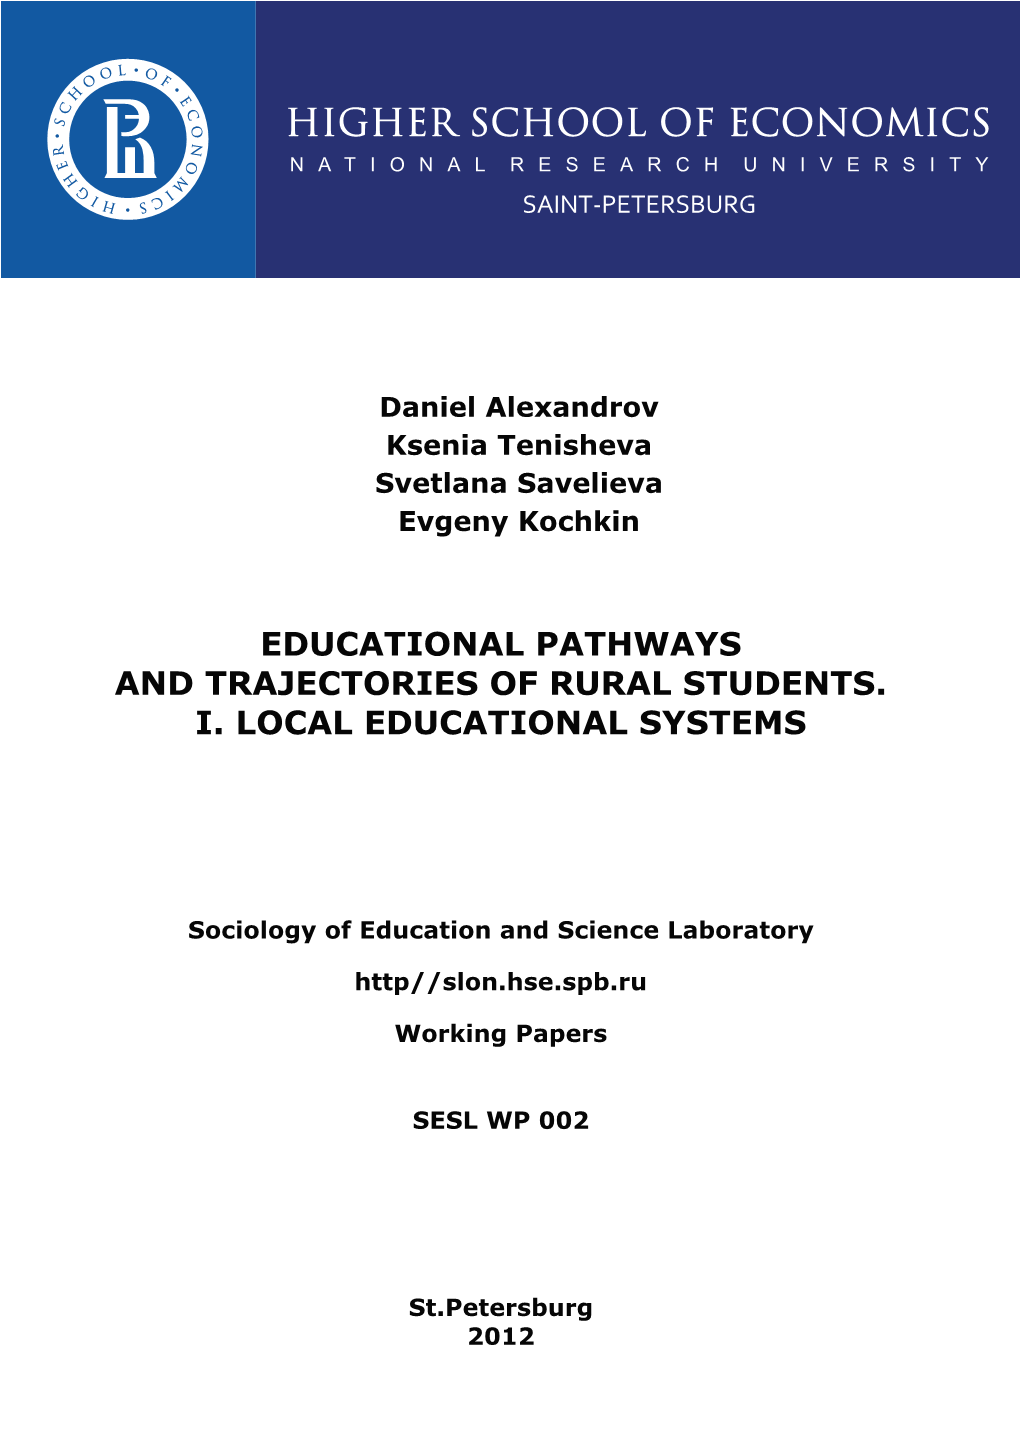 Educational Pathways and Trajectories of Rural Students